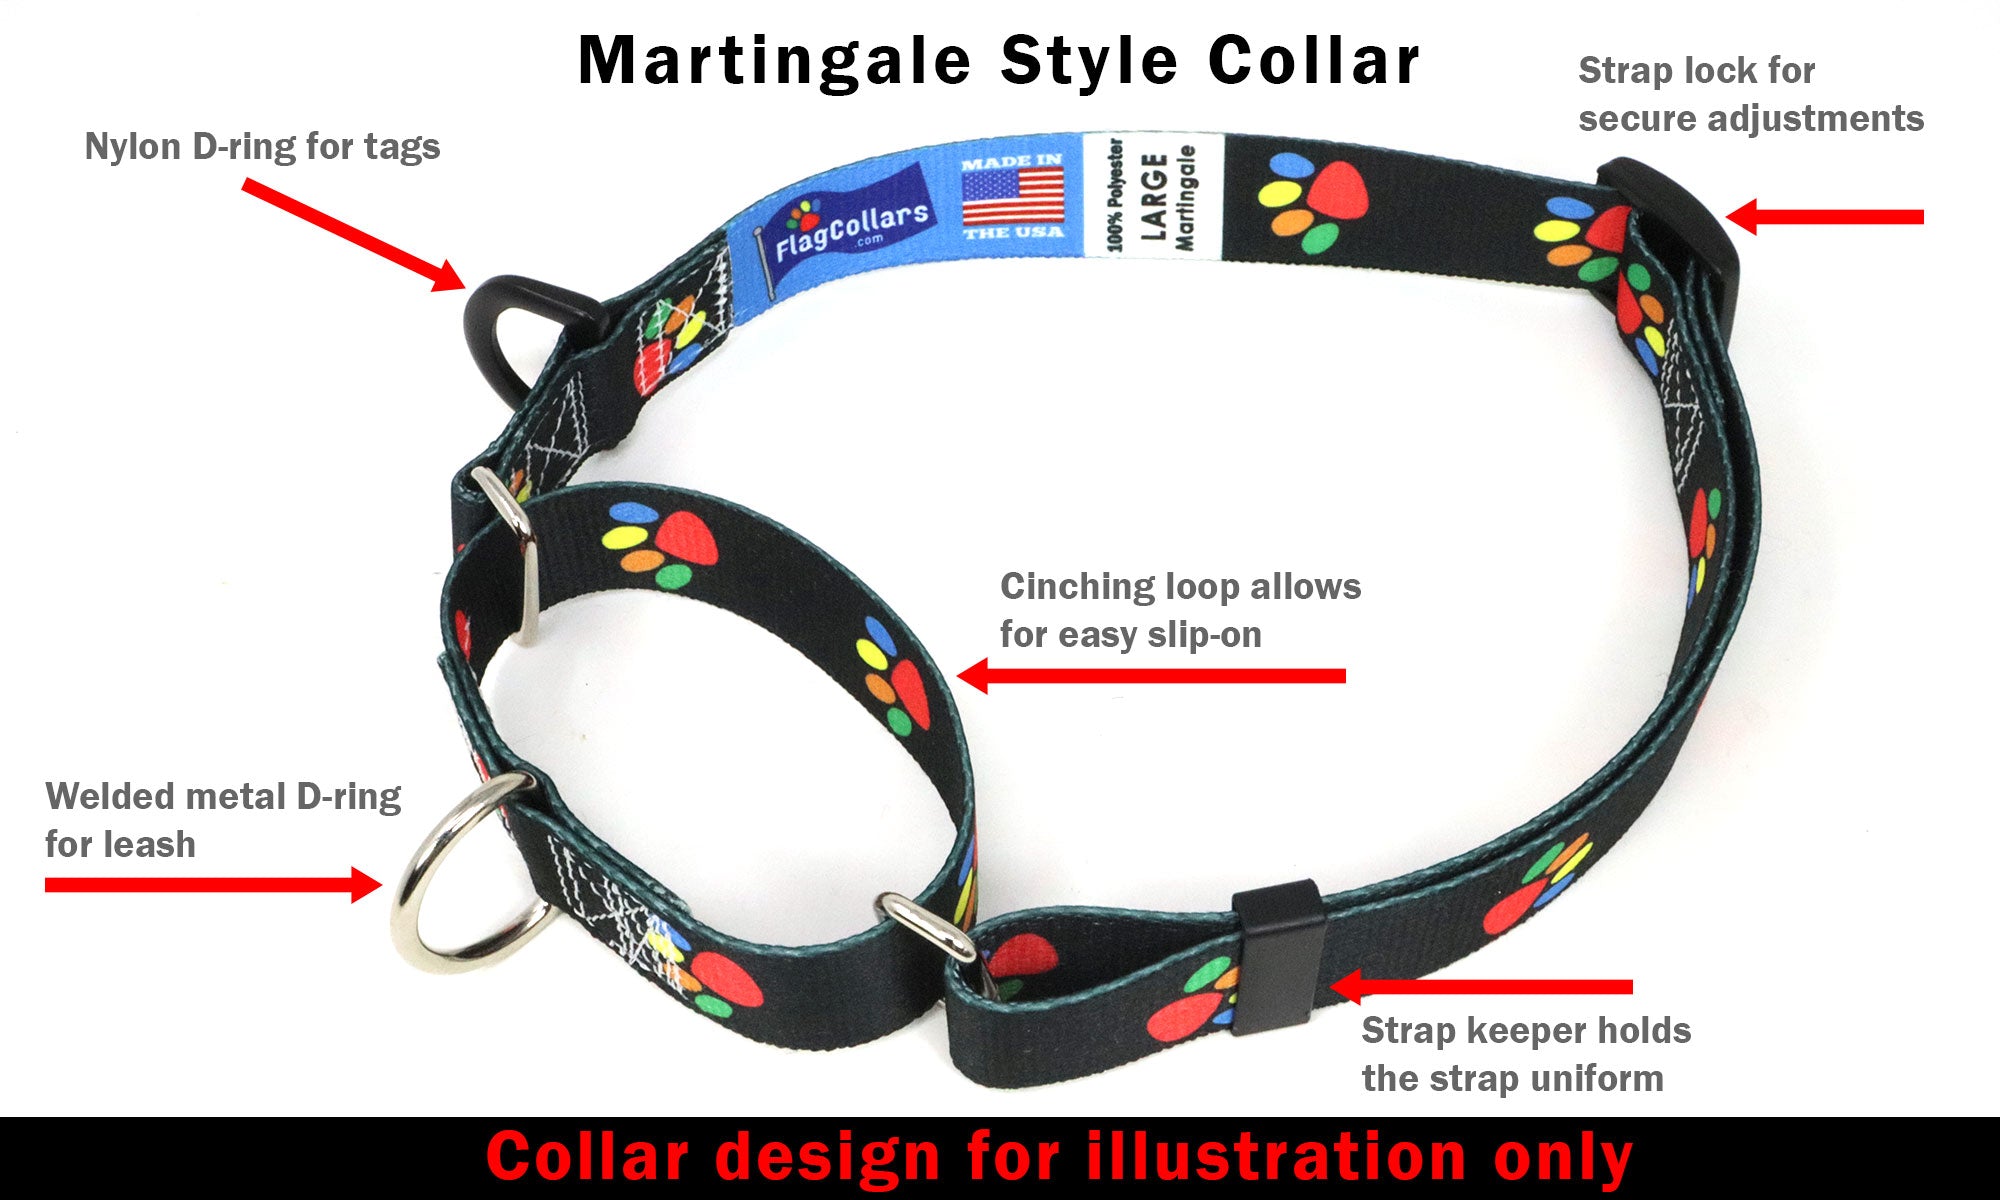 Moldova Dog Collar for Soccer Fans | Black or Pink | Quick Release or Martingale Style | Made in NJ, USA